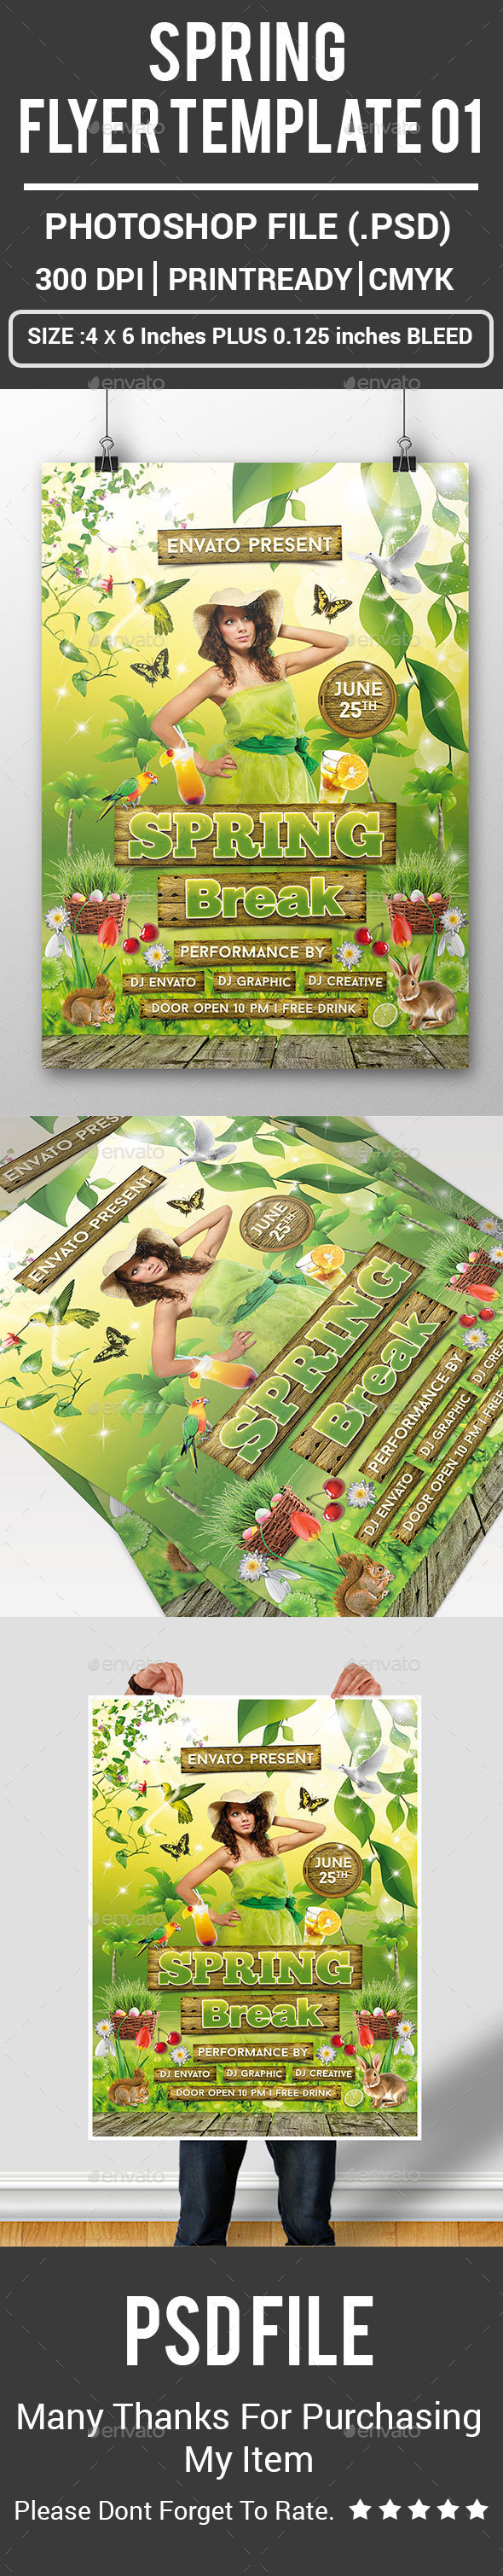 Spring Flyer Template 01